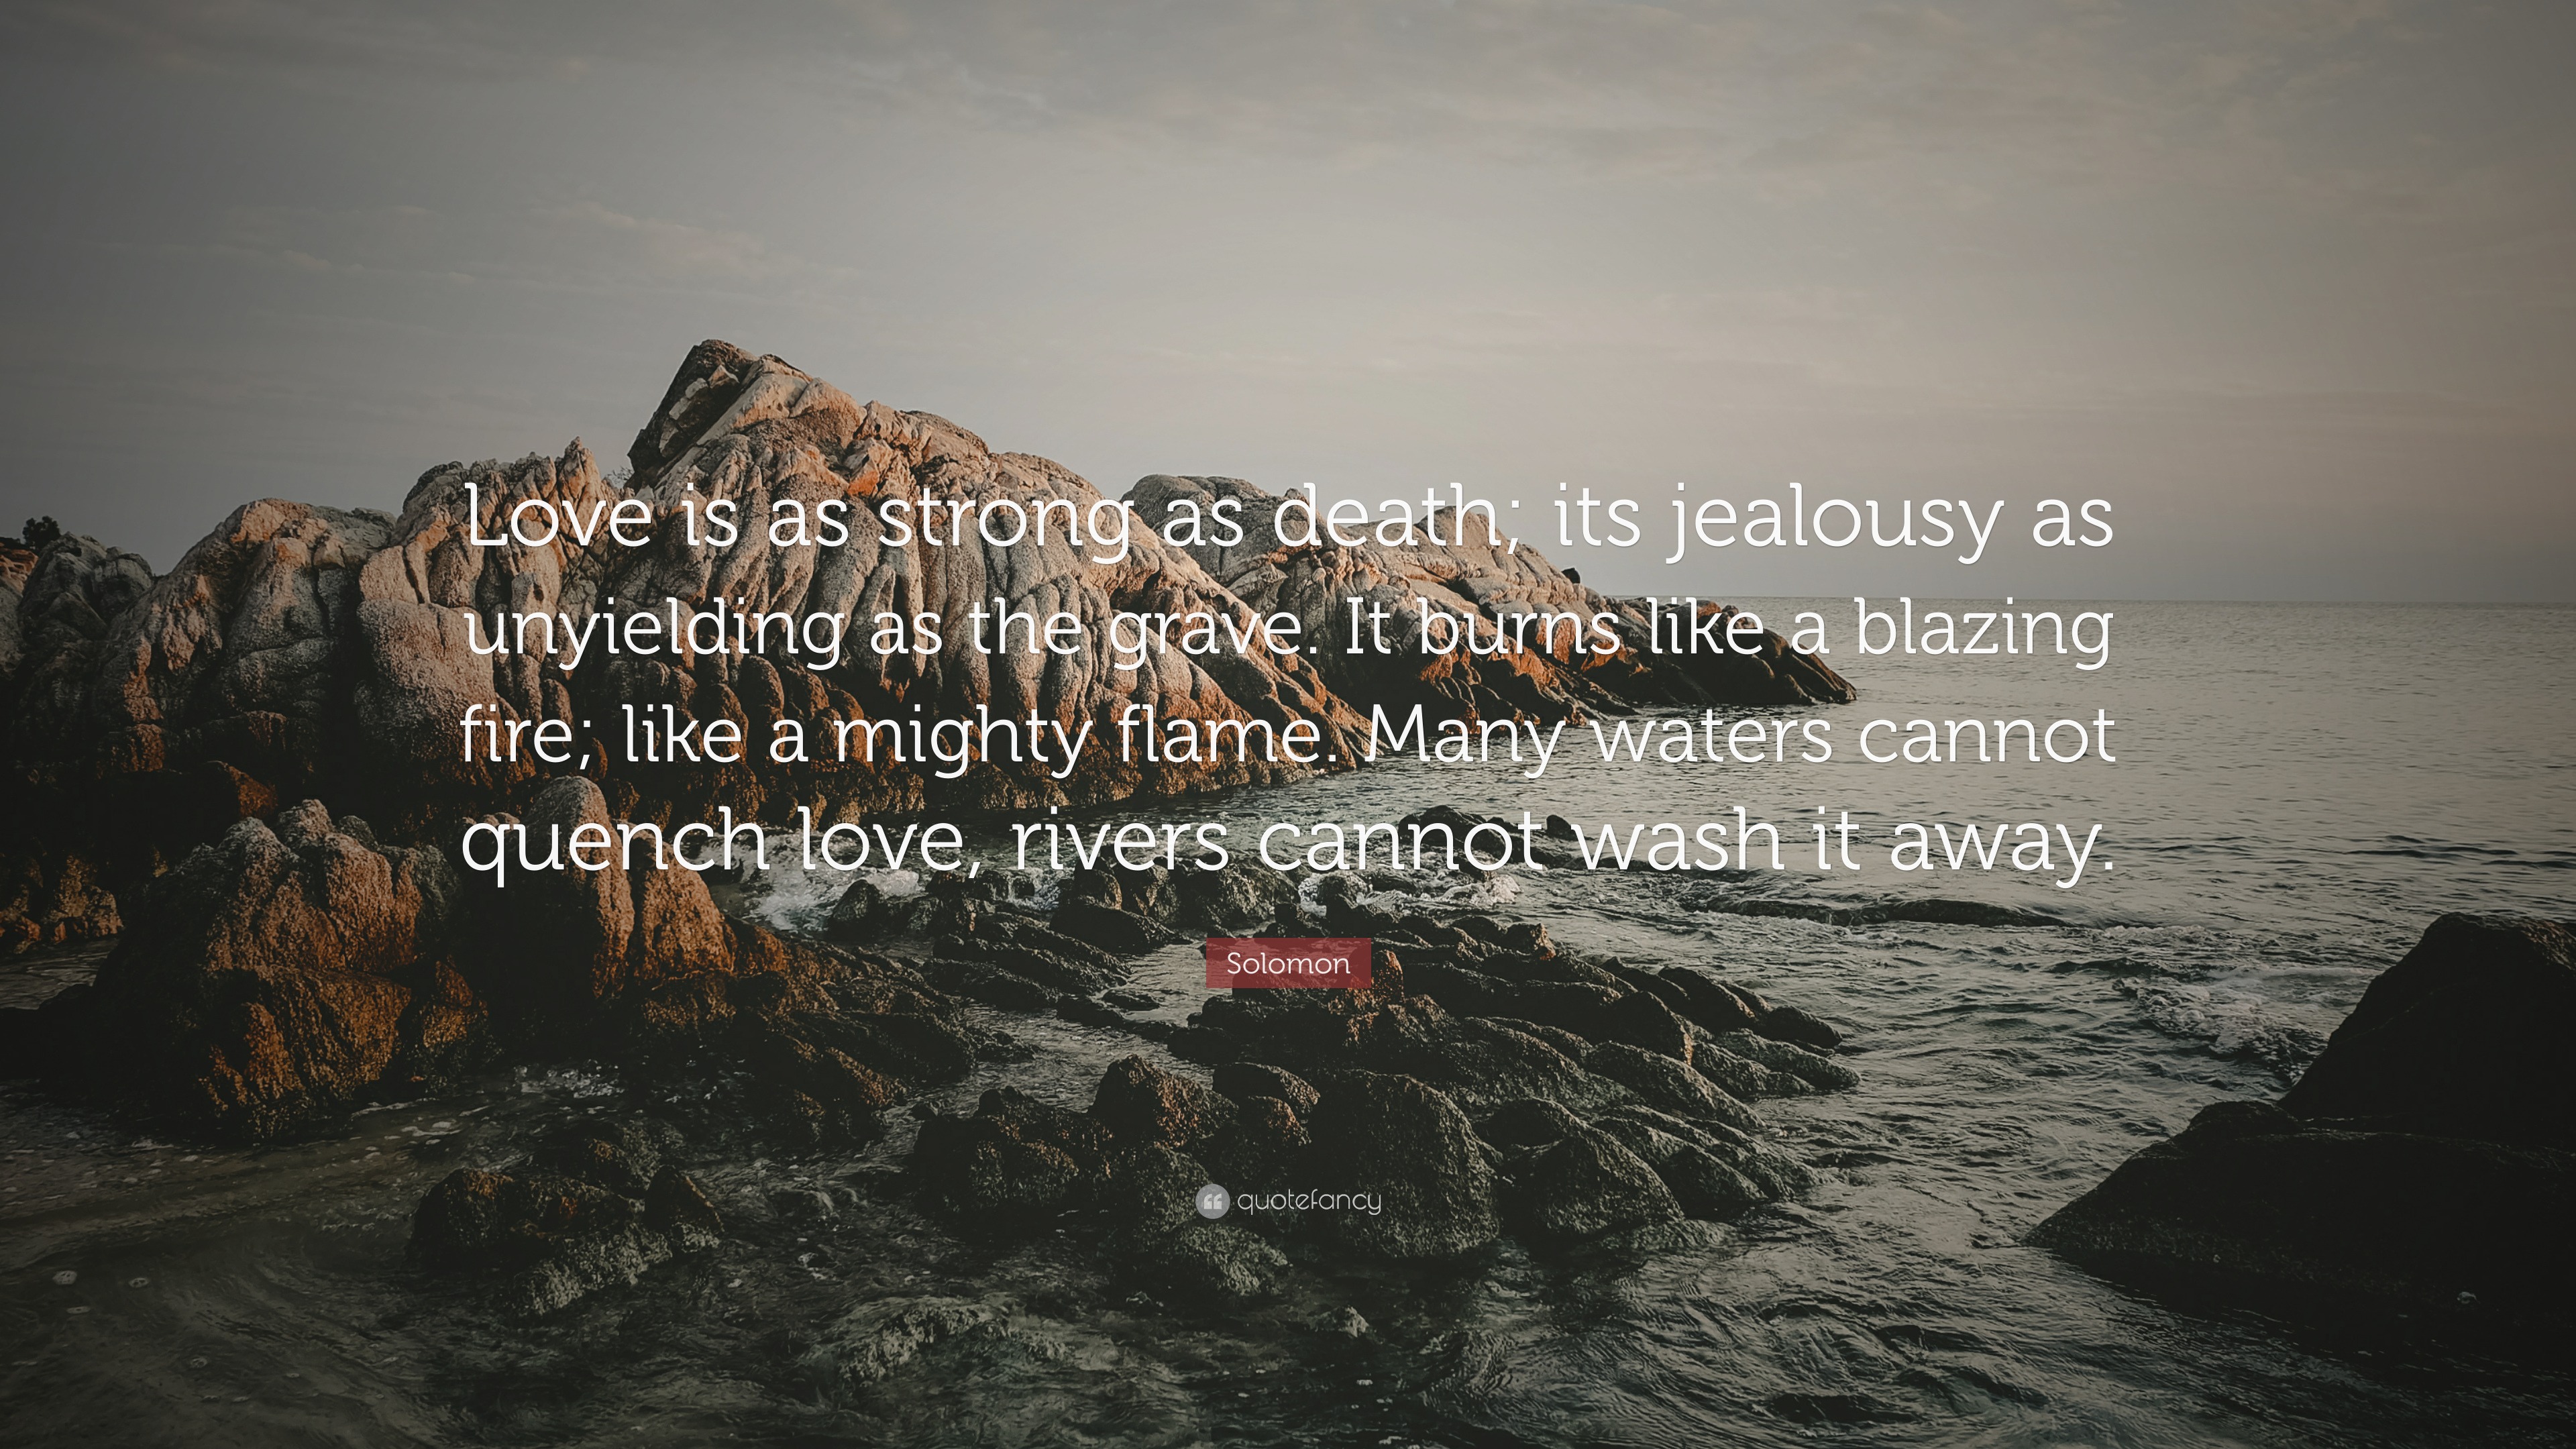 Solomon Quote “Love is as strong as its jealousy as unyielding as